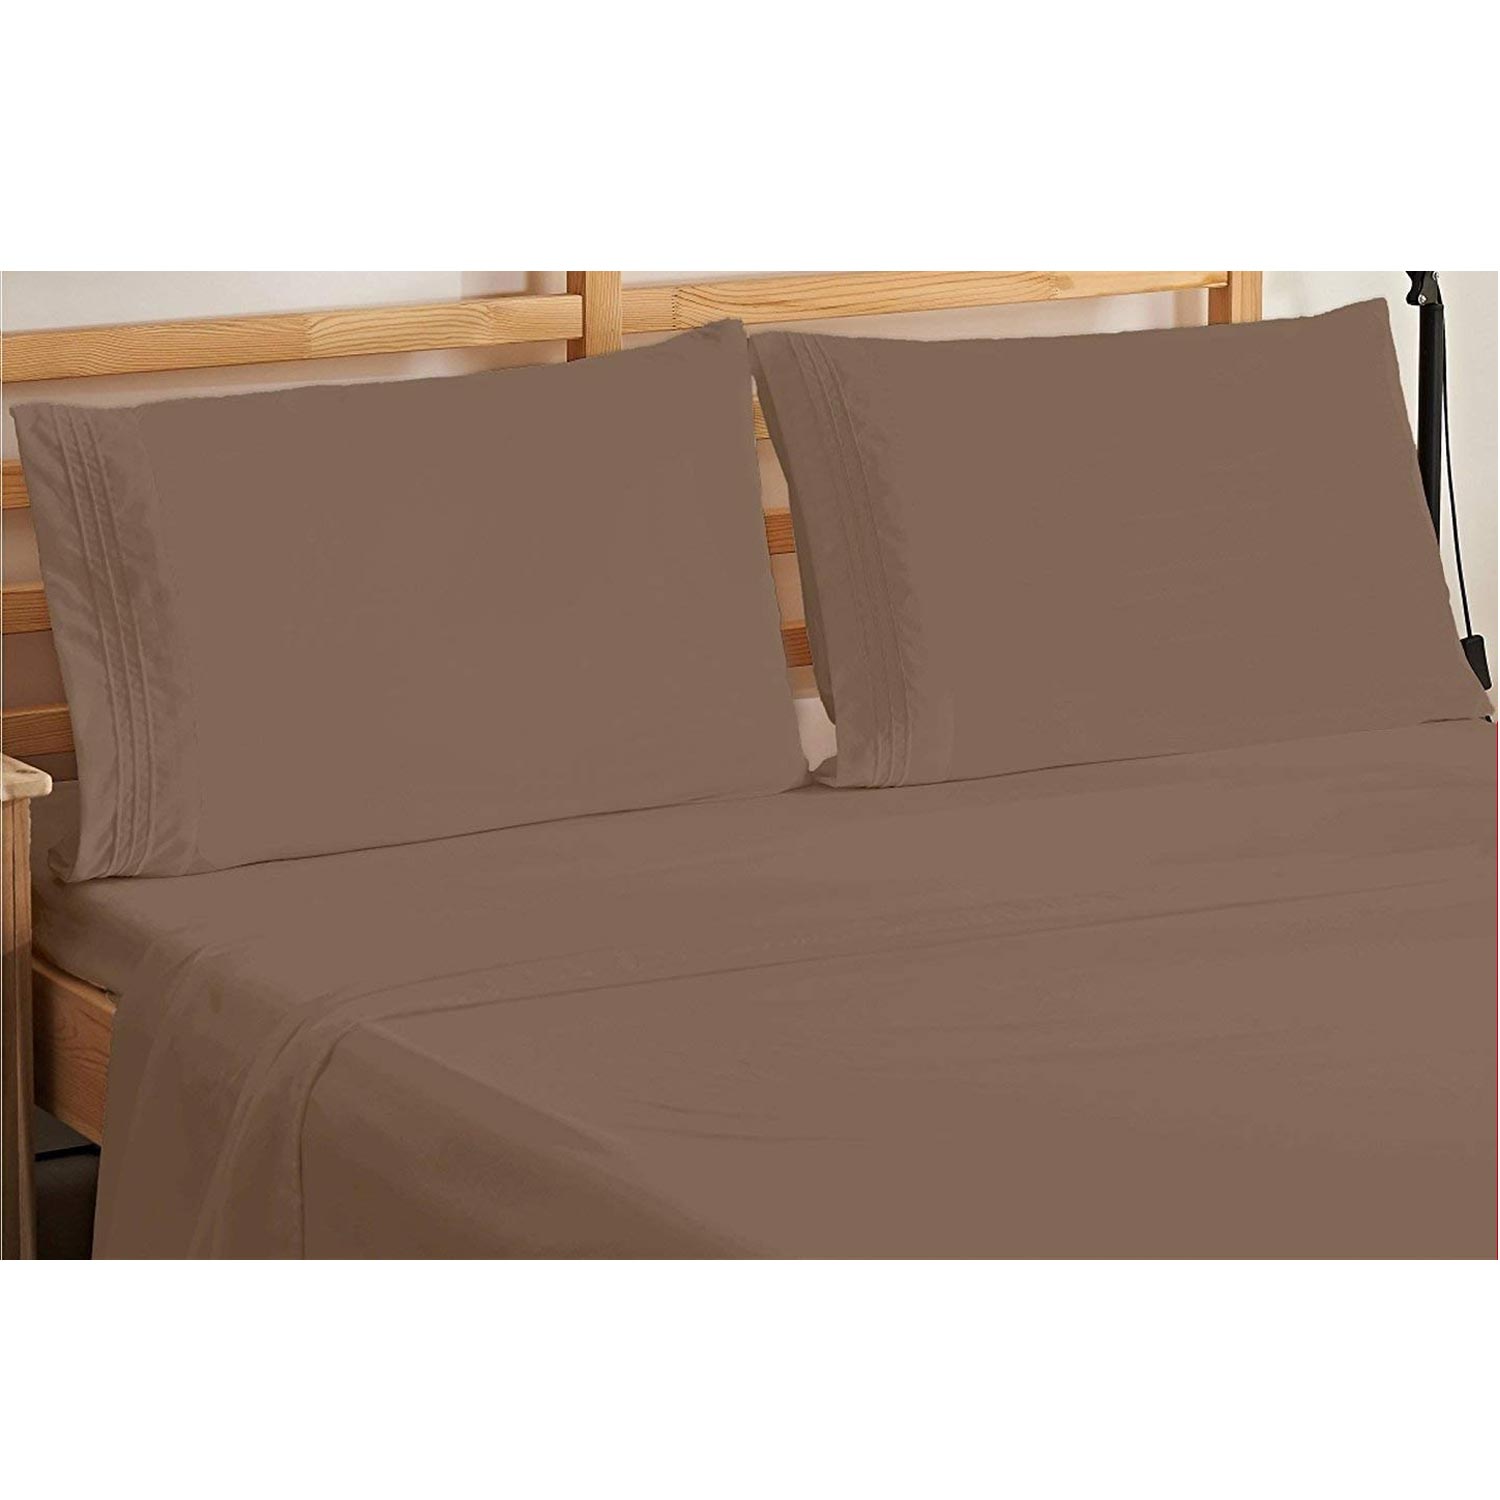 2-Piece 1500 Thread Count Egyptian Quality Pillowcases